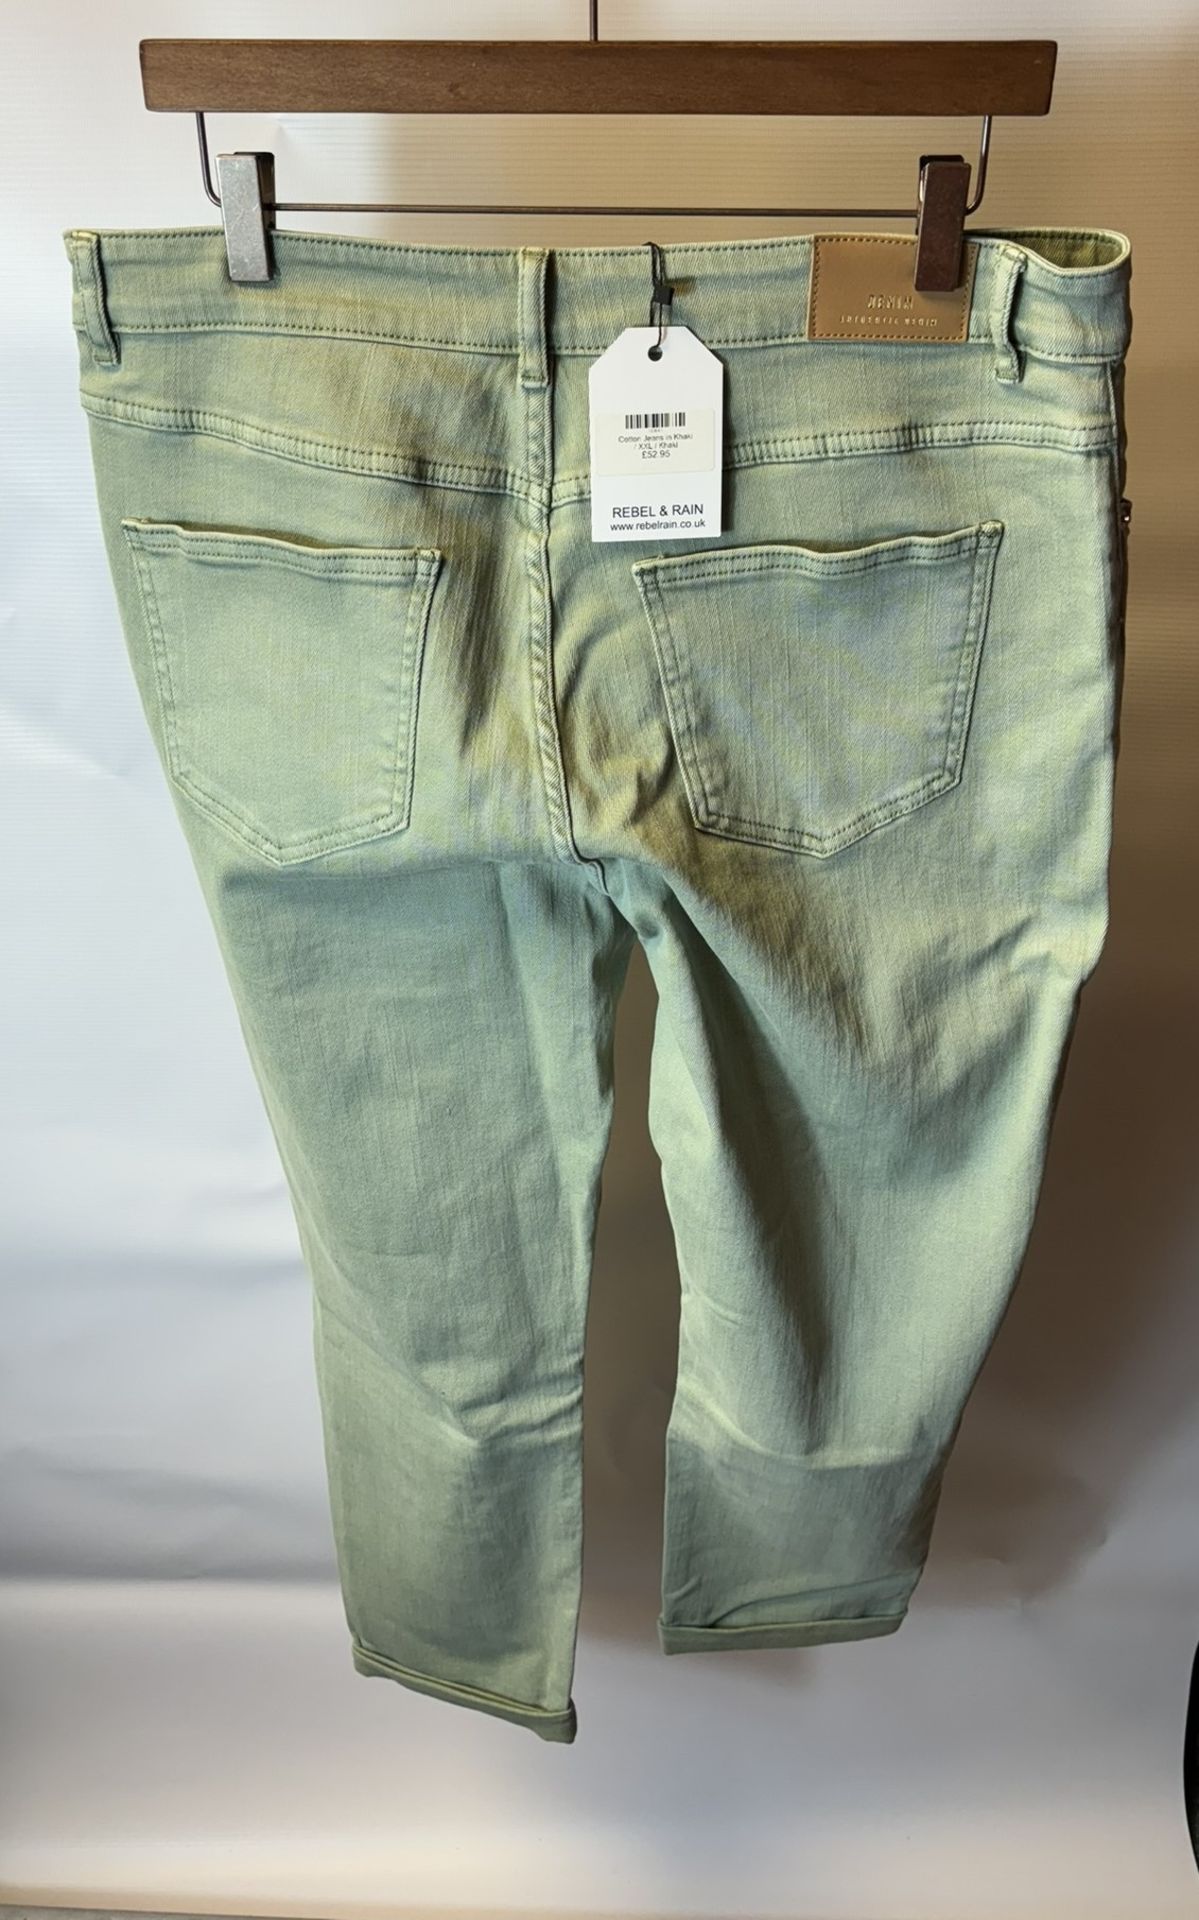 22 x Pairs Of Various Trousers / Jeans As Seen In Photos - Bild 32 aus 65